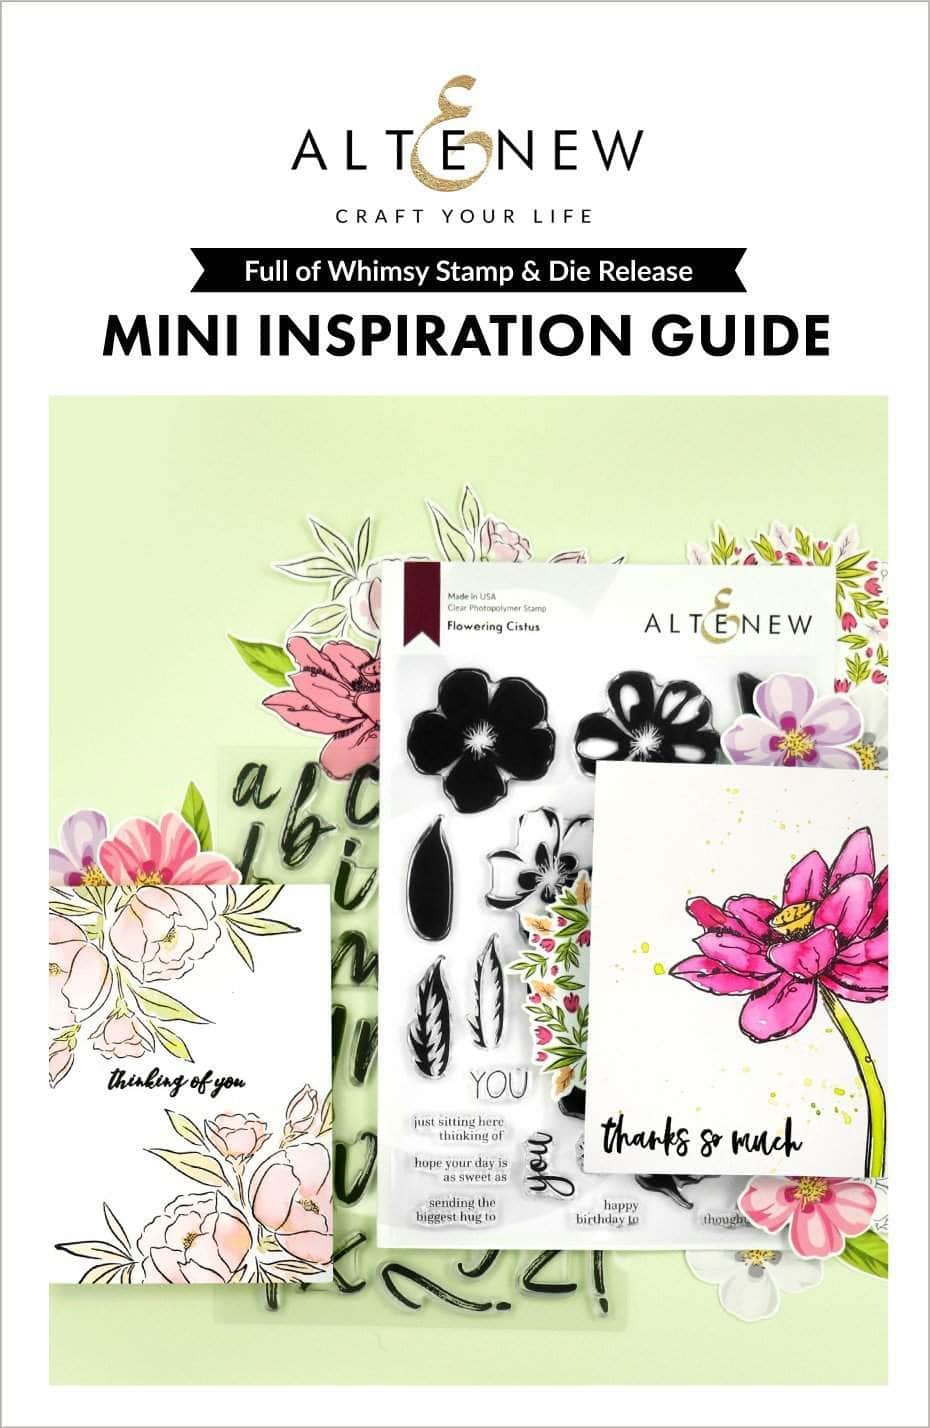 55Printing.com Printed Media Full of Whimsy Stamp & Die Release Mini Inspiration Guide